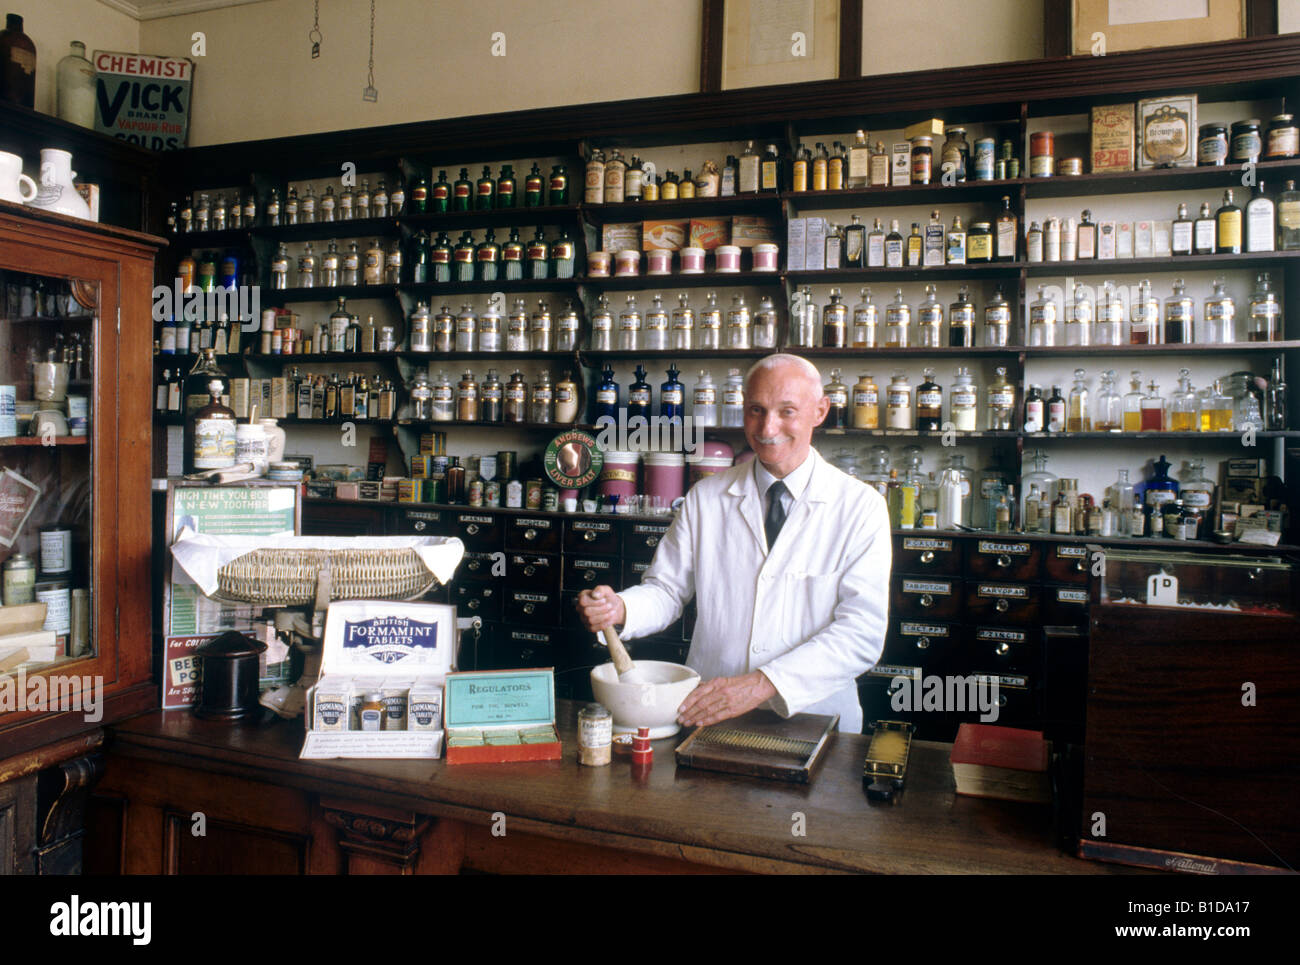 Black Country Museum Dudley Victorian Period chemists Shop Worcestershire England UK Stock Photo